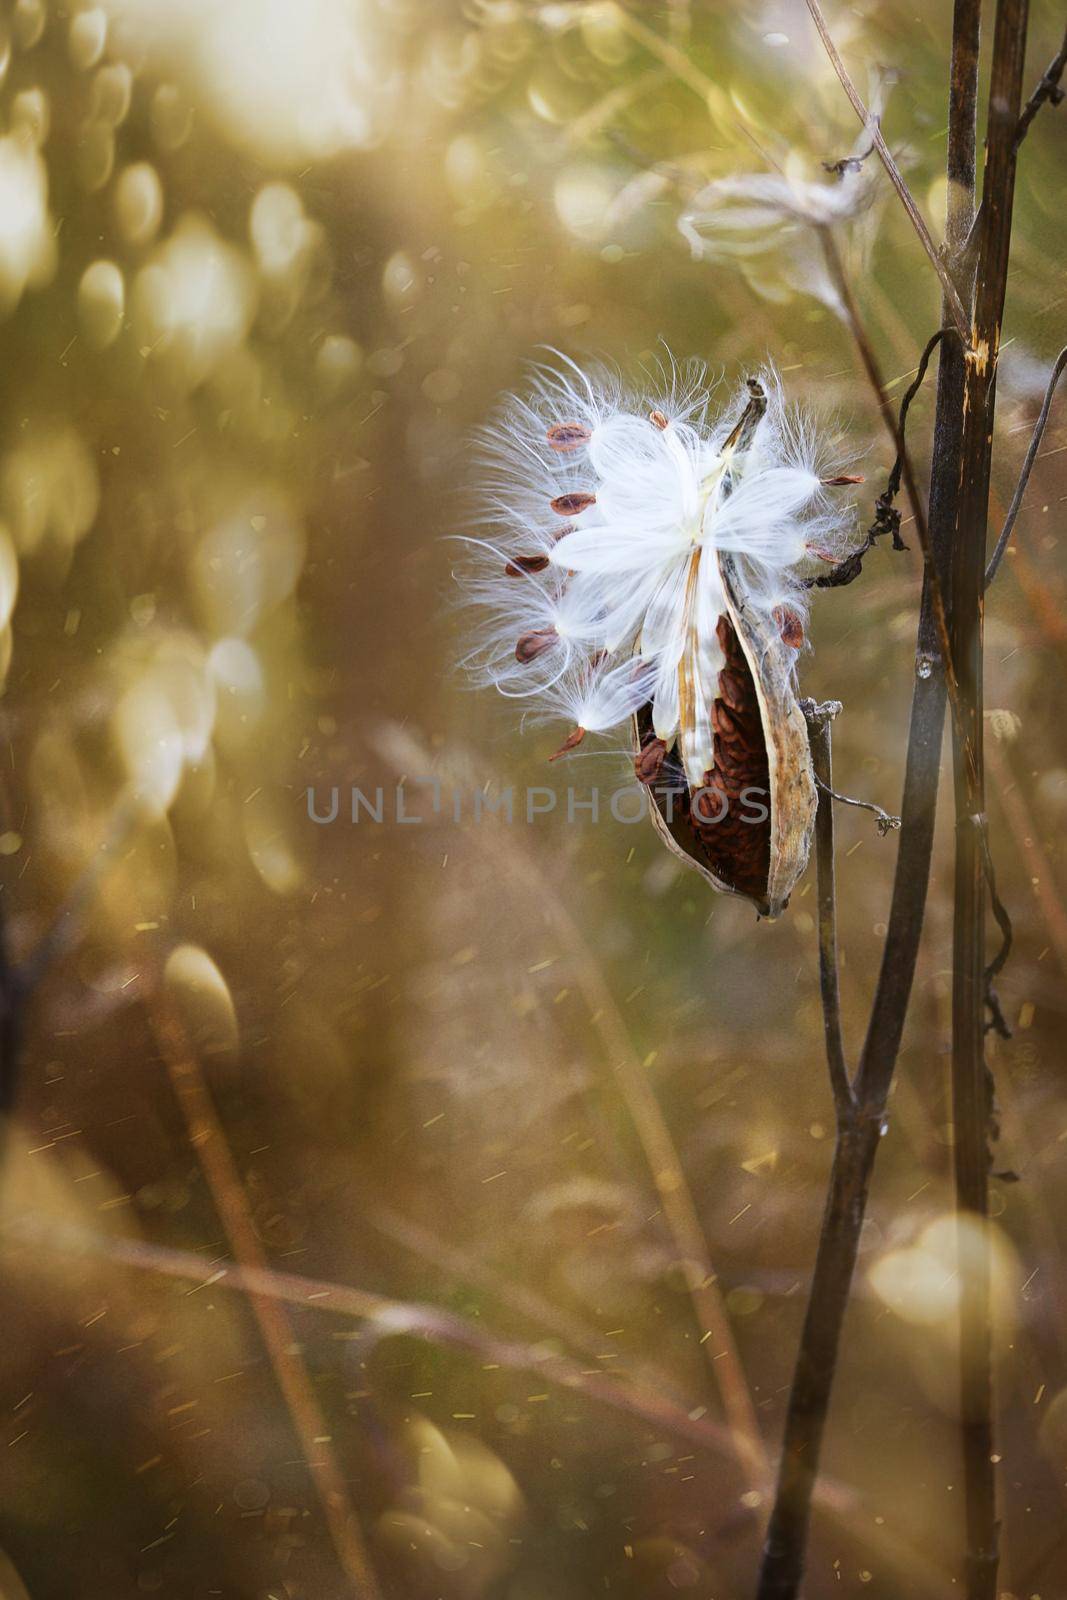 Milkweed pods opening with seeds about to blow in the wind